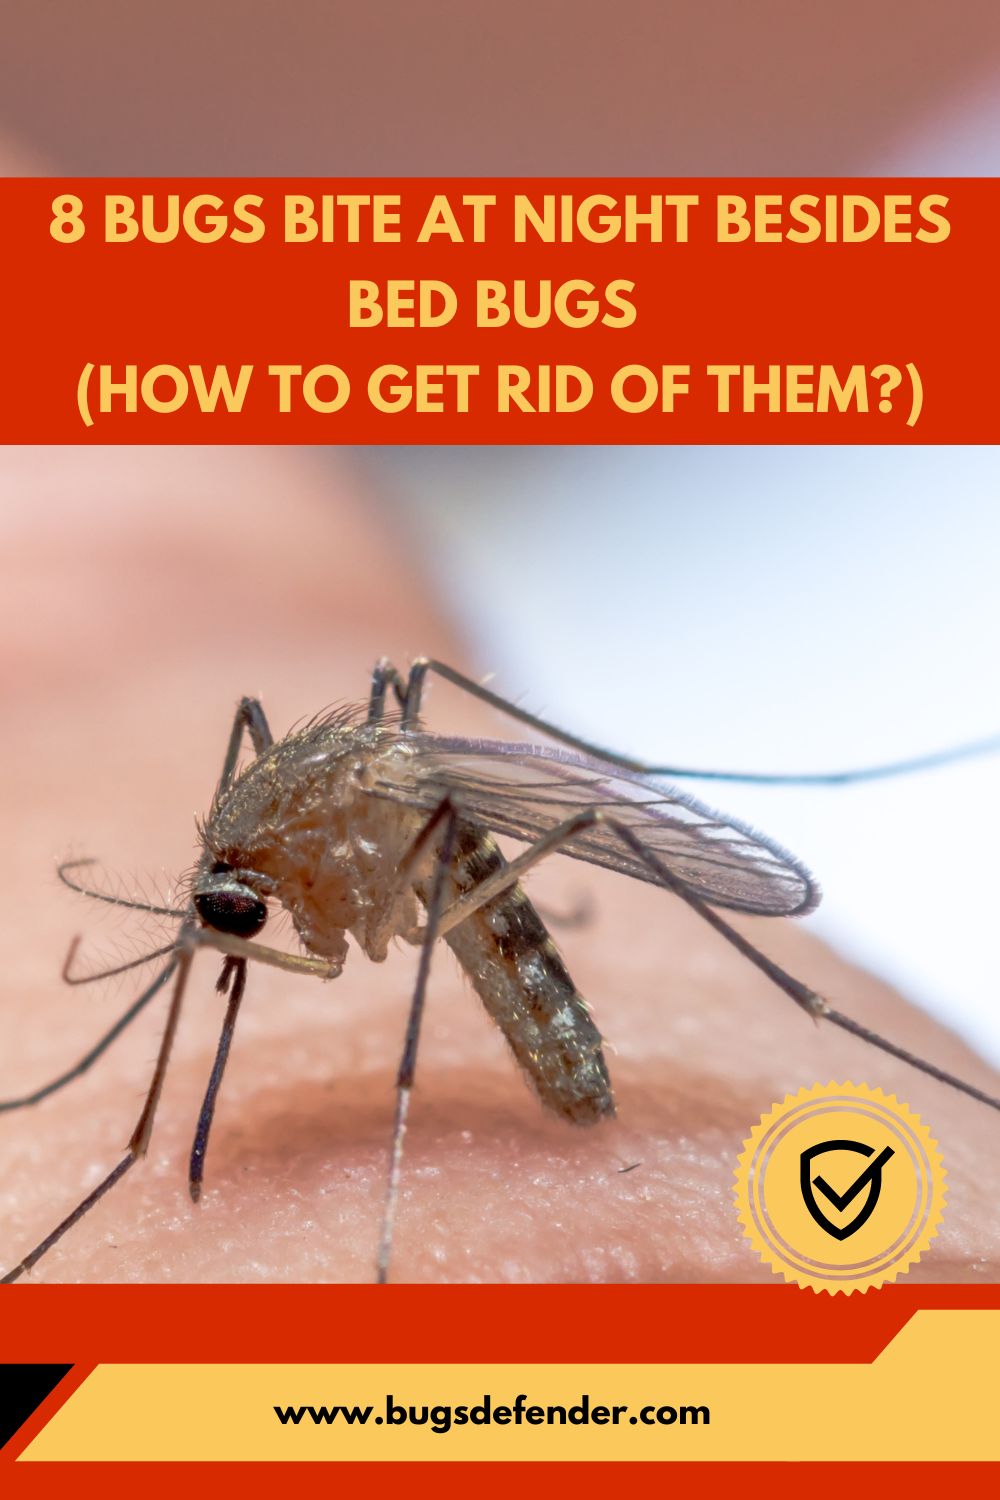 8 Bugs Bite at Night Besides Bed Bugs pin1